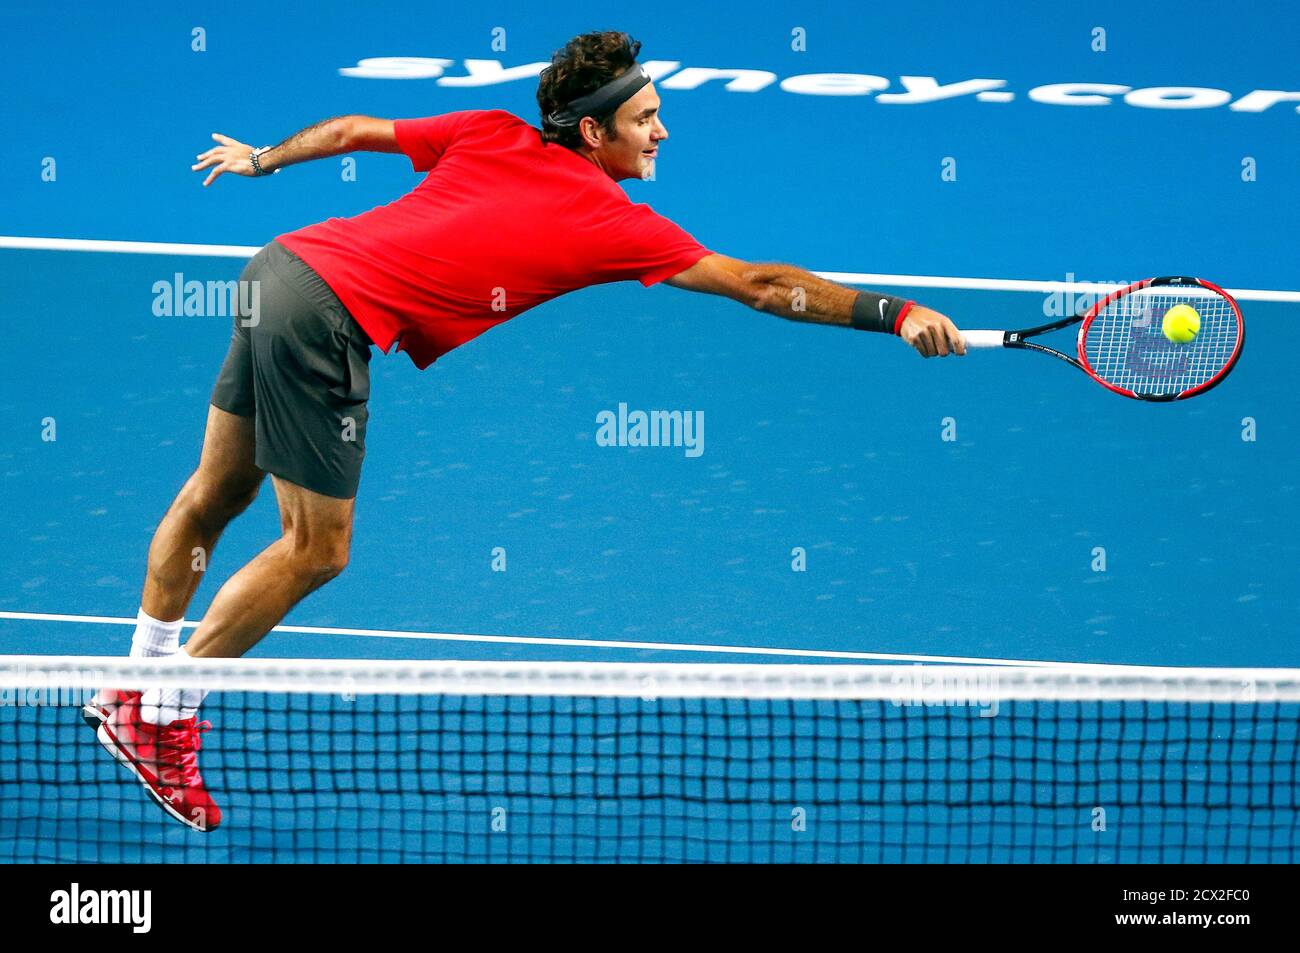 Switzerland's Roger Federer hits a shot during his match against  Australia's Lleyton Hewitt for the launch of a new format of tennis called  "Fast4" at the Sydney Entertainment Centre January 12, 2015.